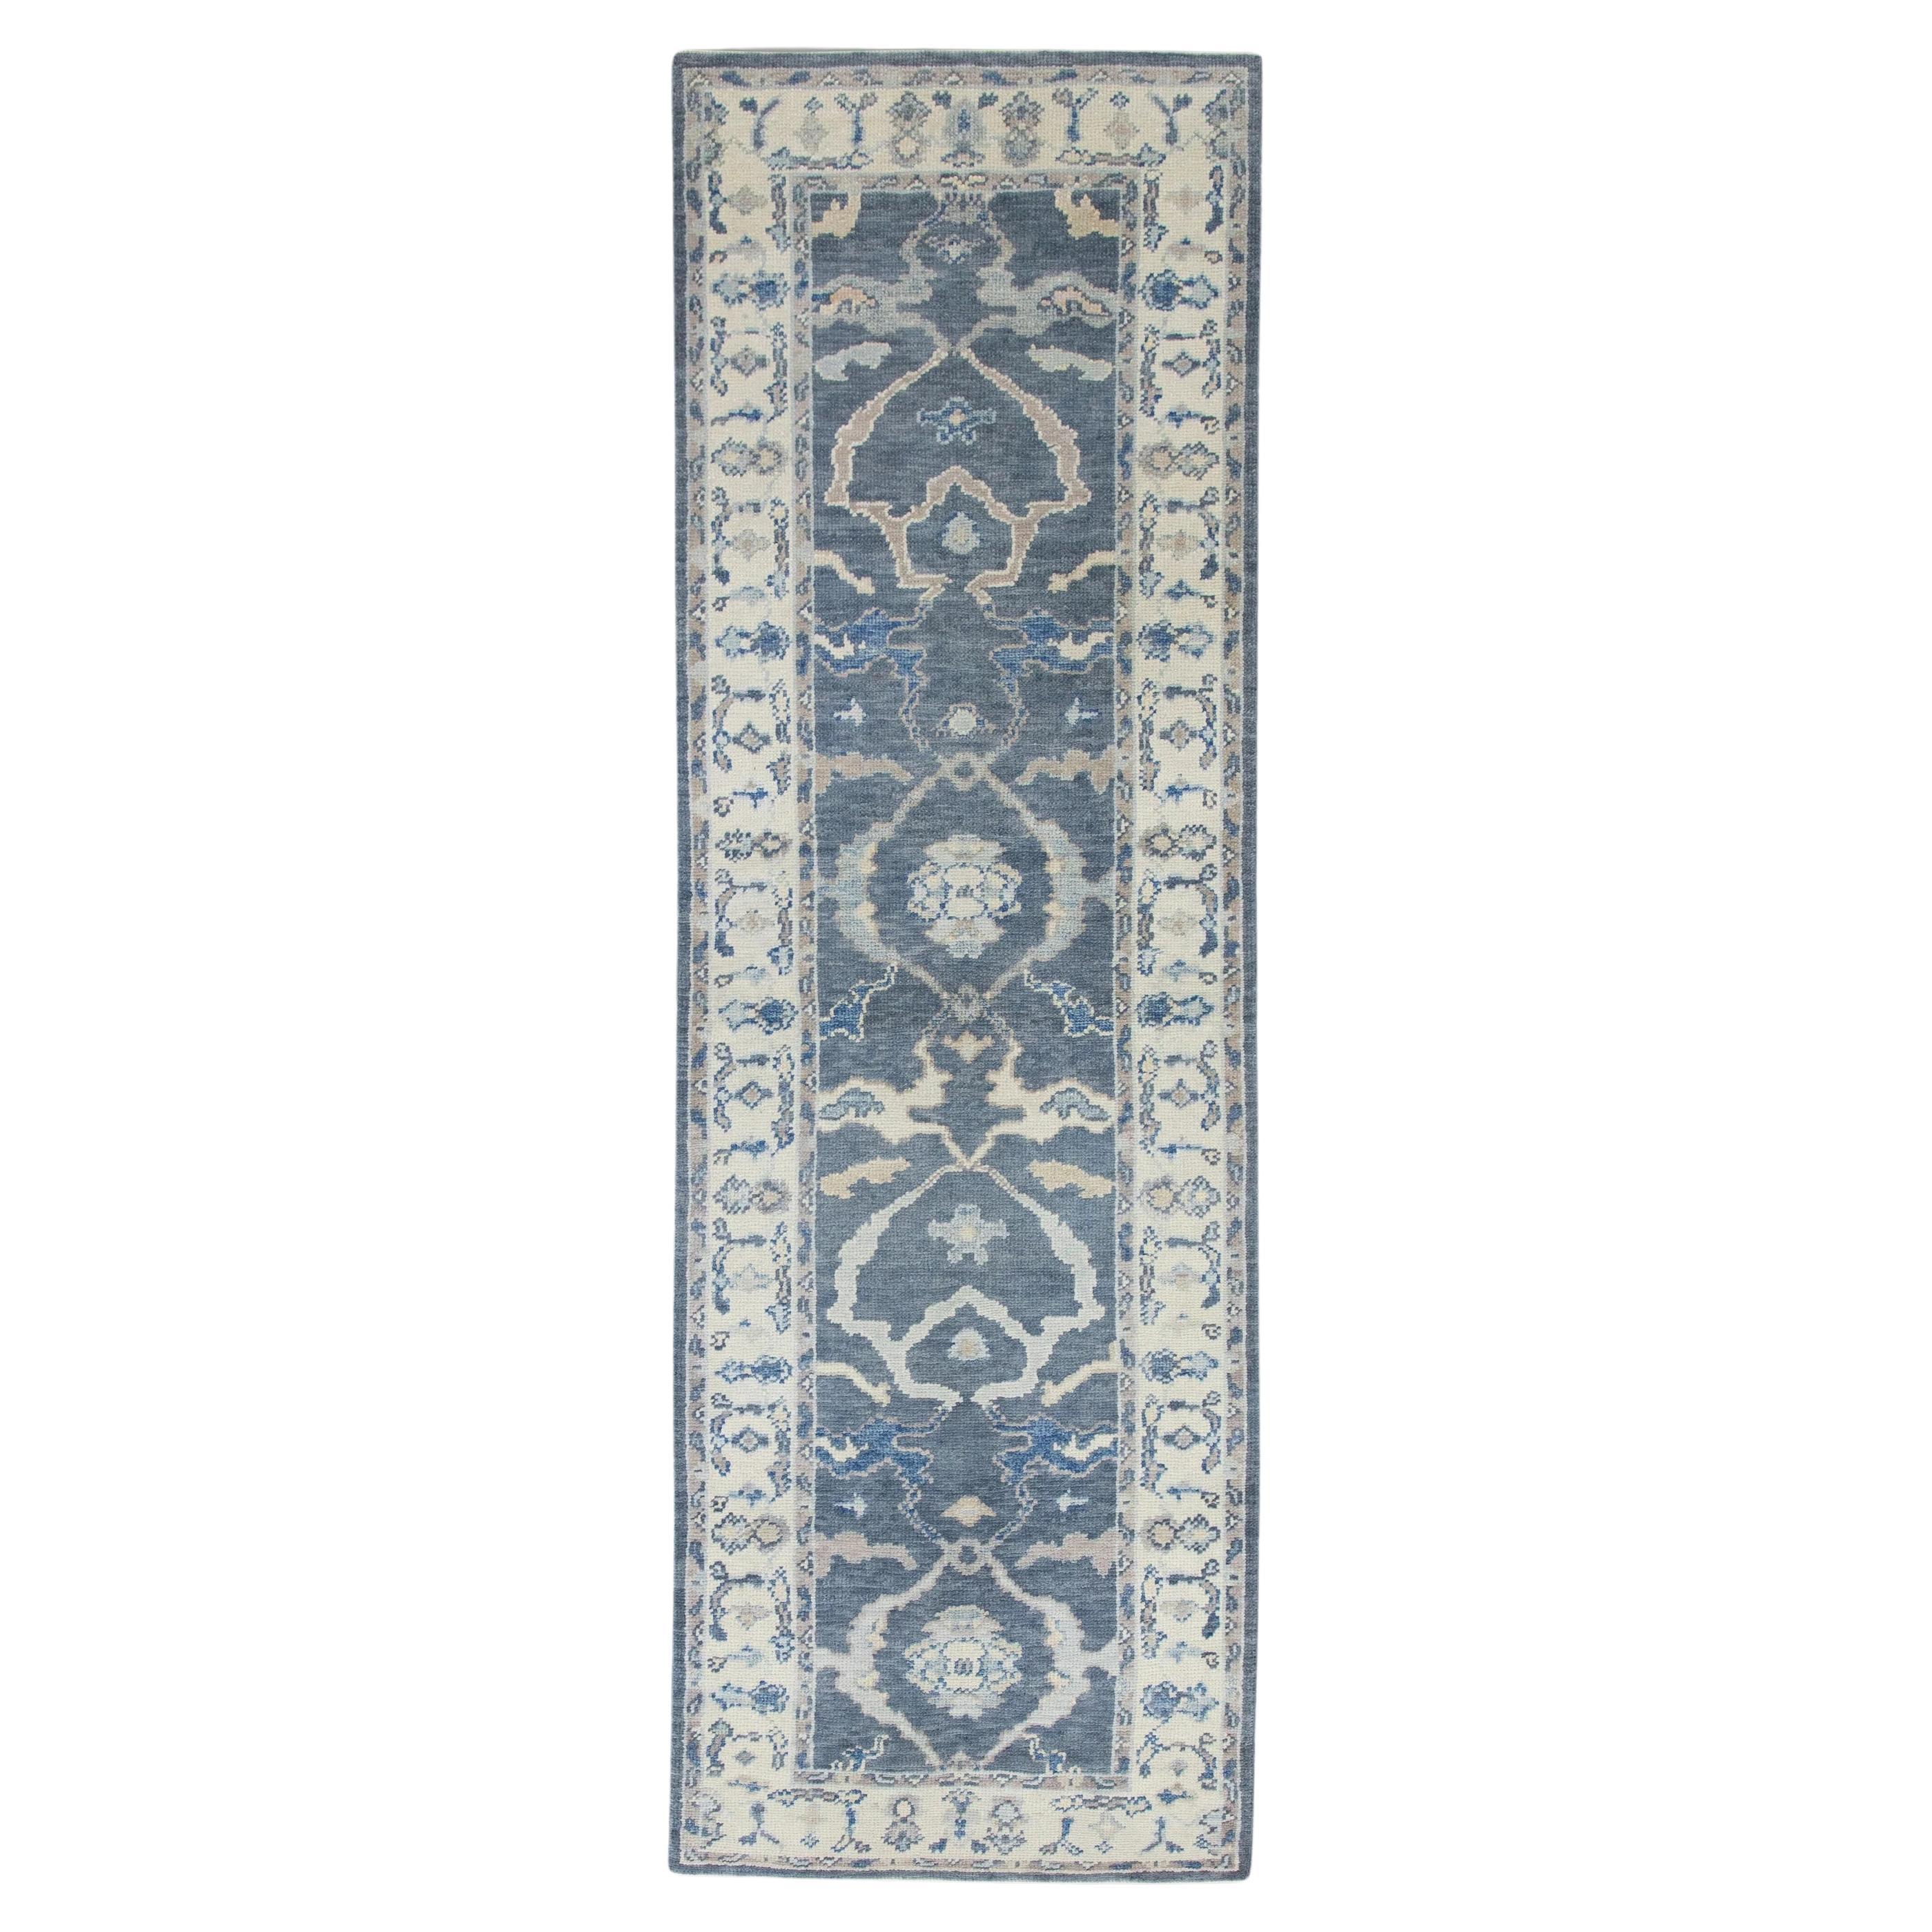 Blue Handwoven Wool Turkish Oushak Rug in Pink Floral Design 2'11" x 9'2" For Sale